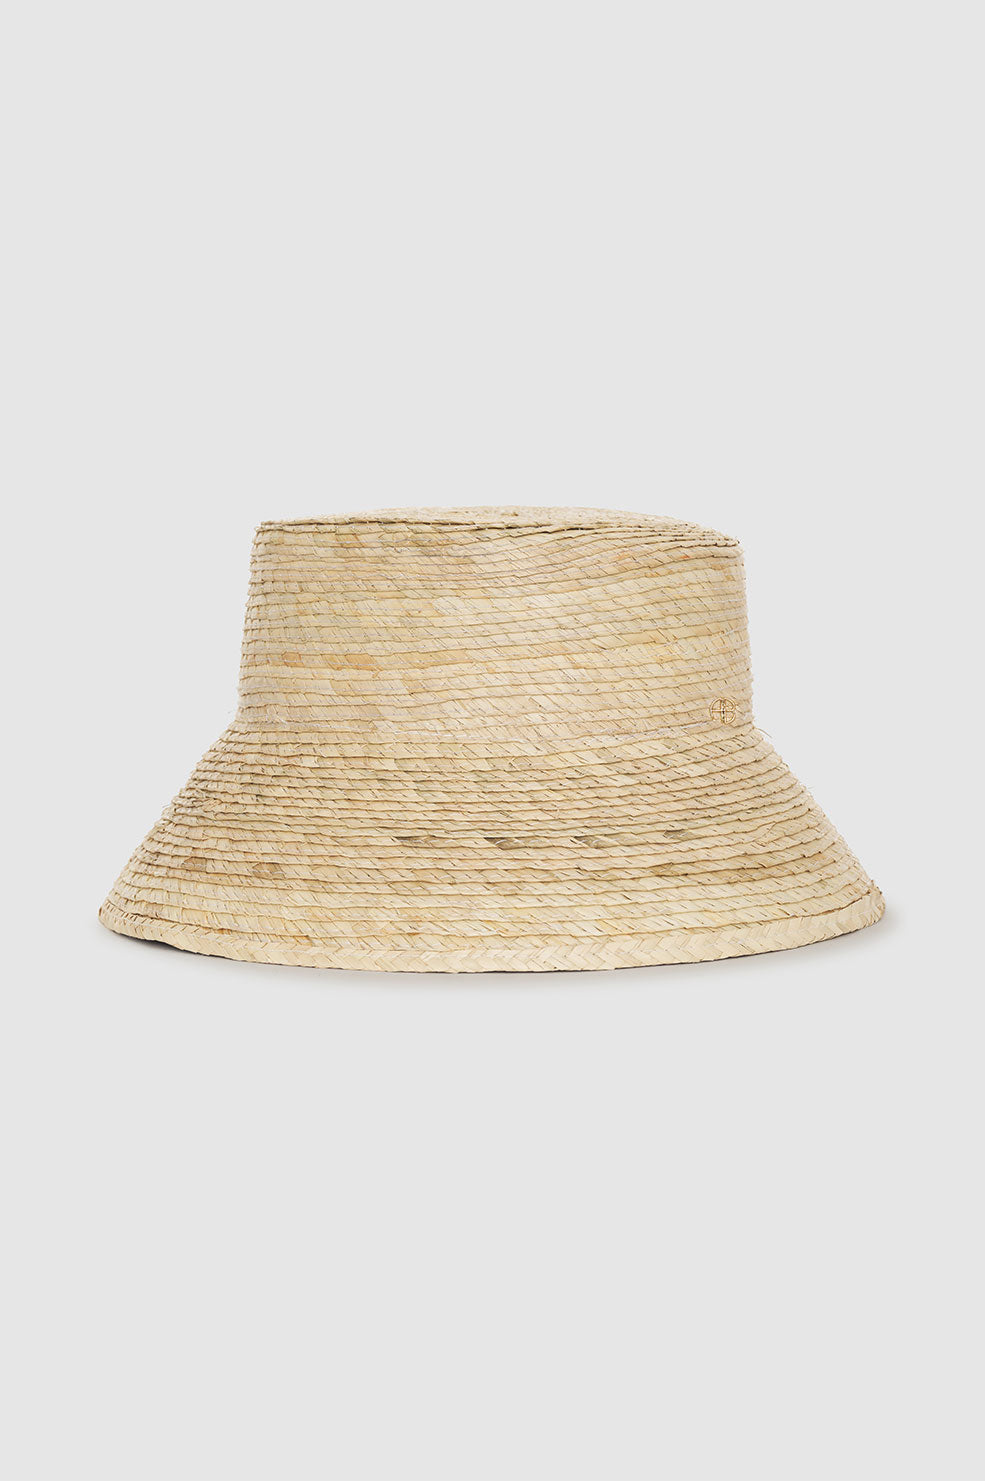 ANINE BING Cabana Bucket Hat - Natural - Front View